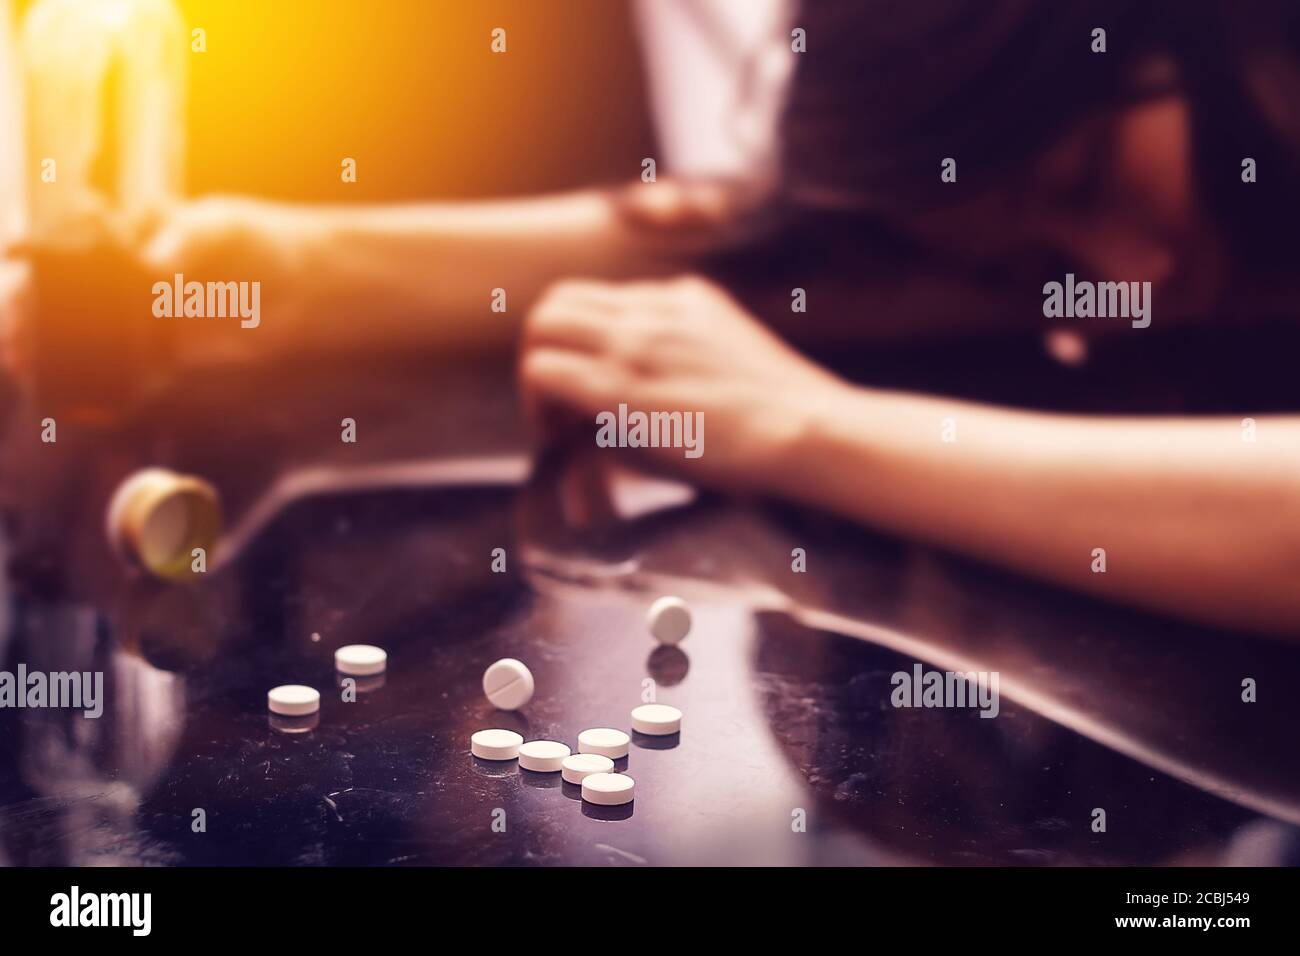 overdose , drug addiction problem concept : Several pill spilled on table Near bottle of alcohol. Stock Photo